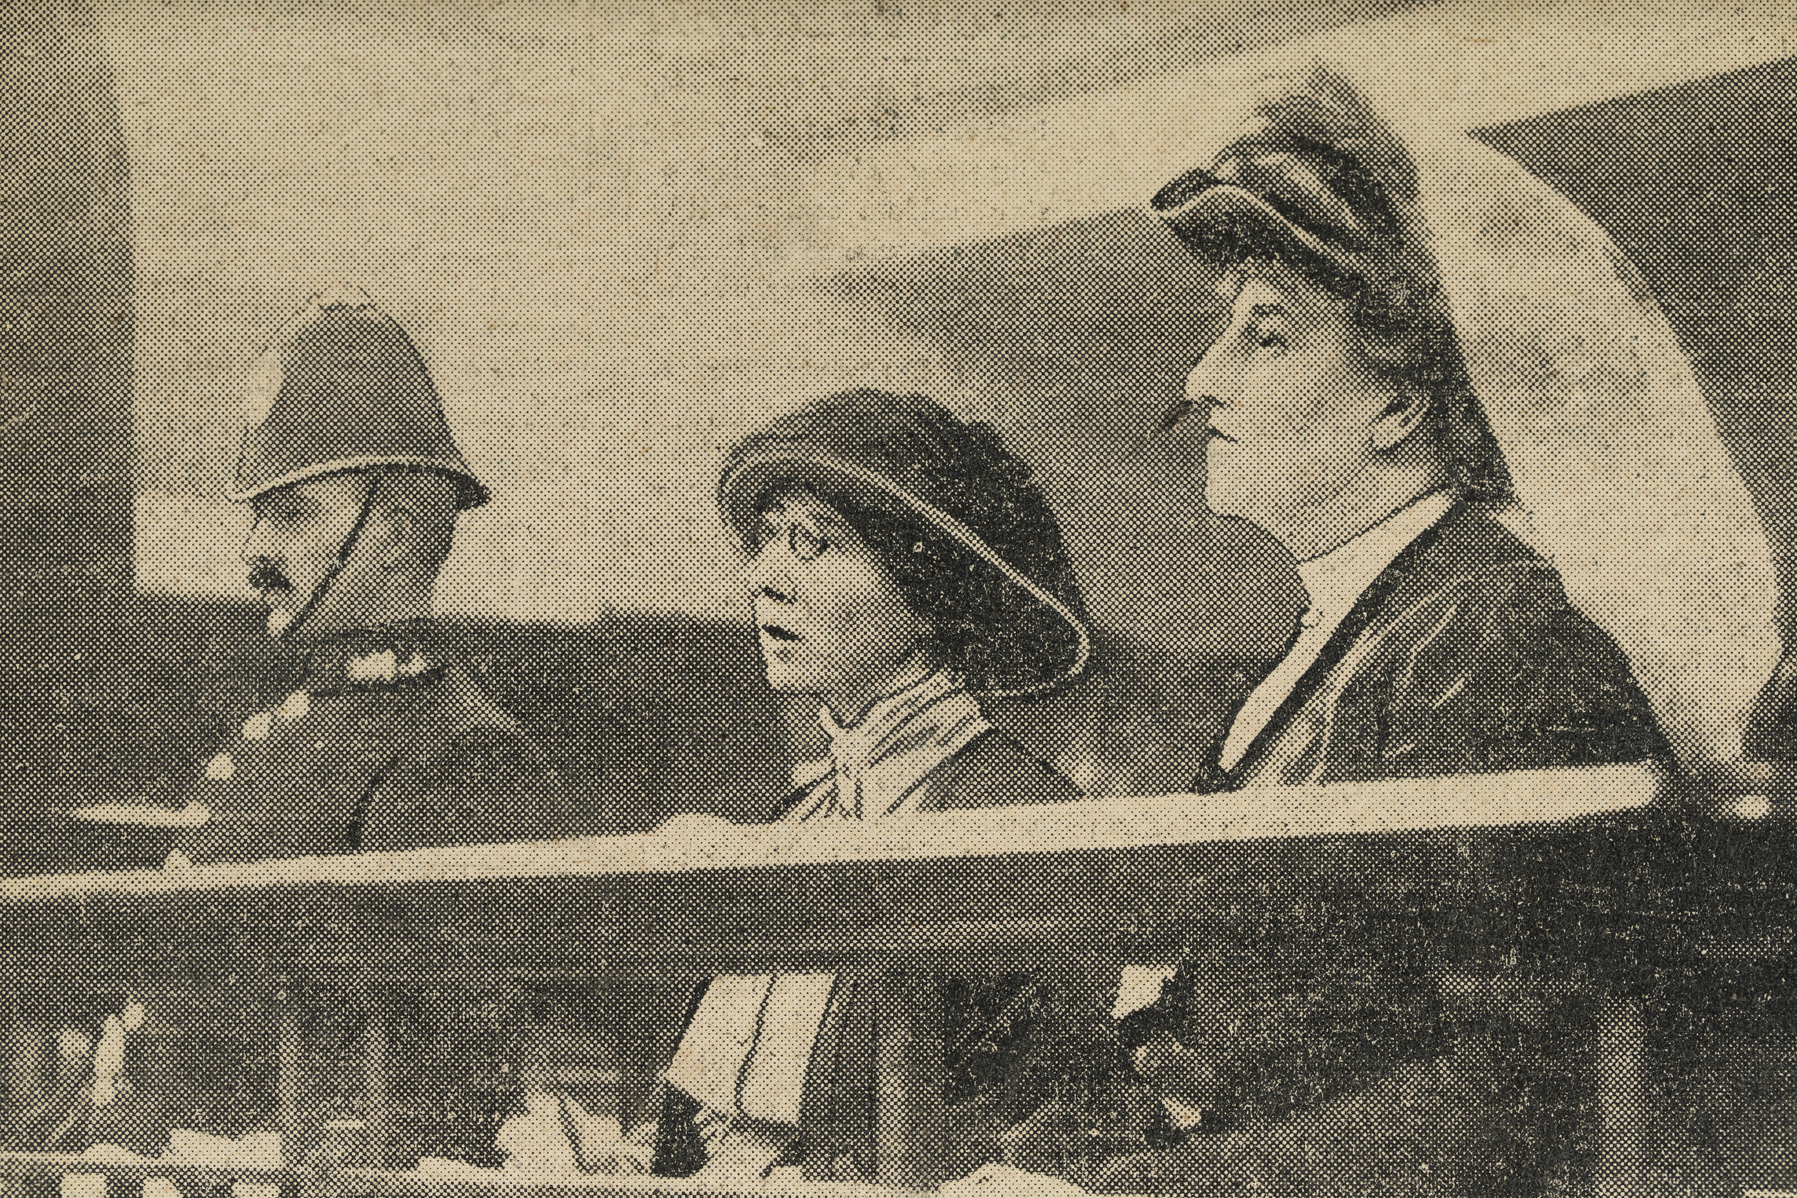 Image from a newspaper of a policeman, Ethel Moorhead and Dorothea Chalmers Smith (from right to left)